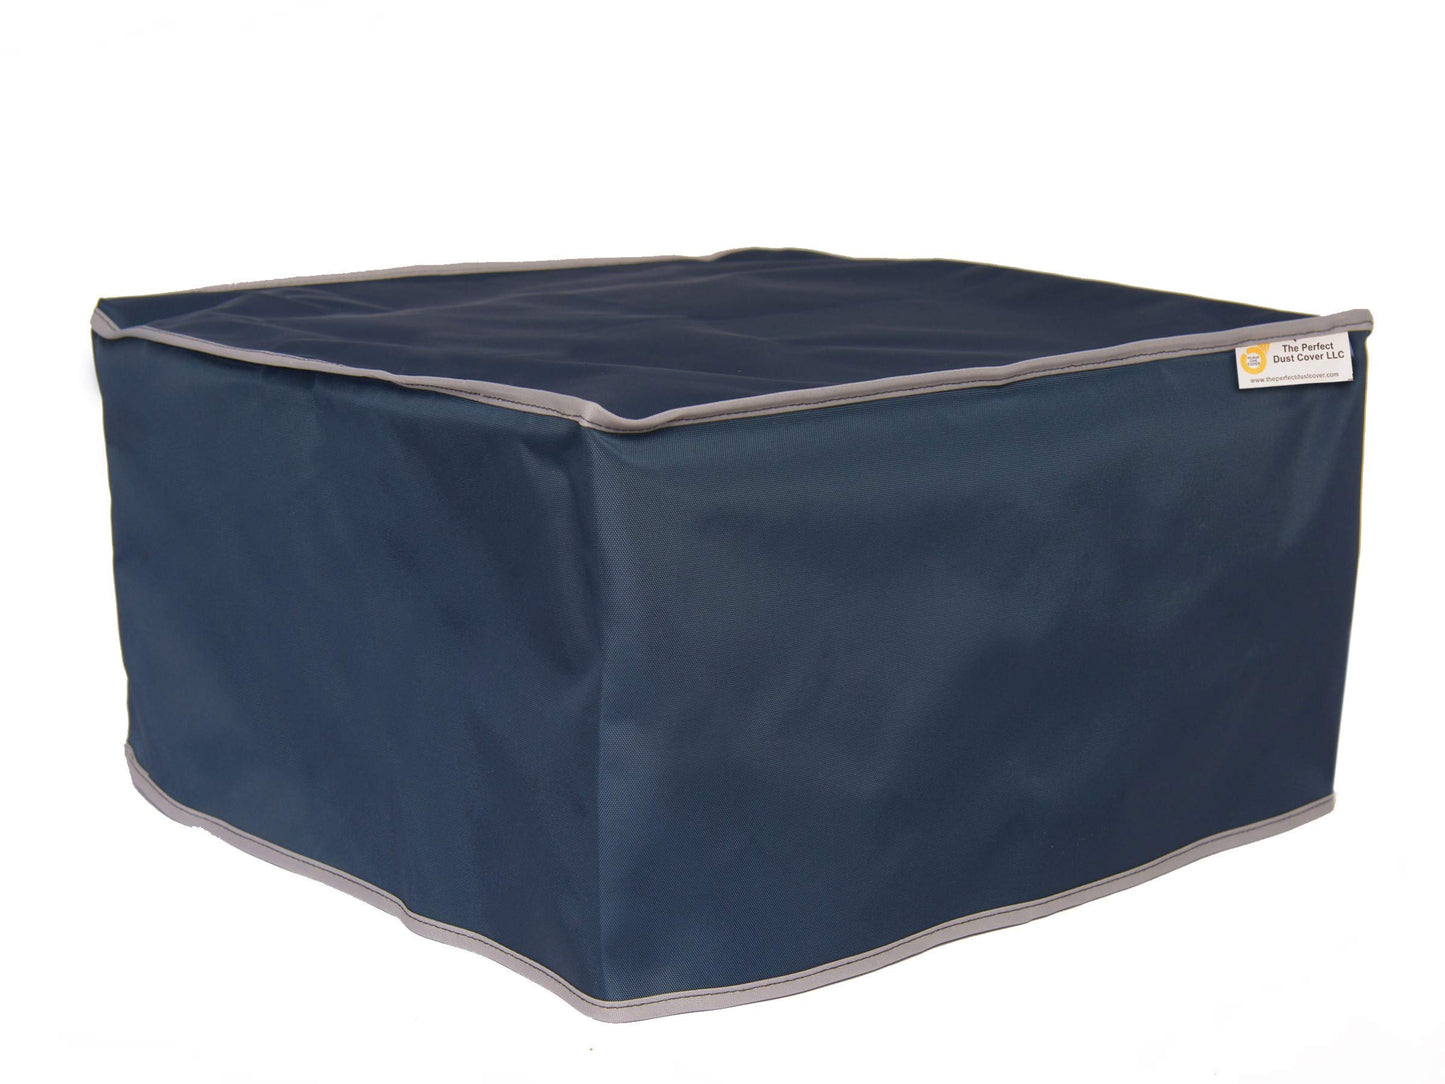 The Perfect Dust Cover, Navy Blue Nylon Cover Compatible with Epson Workforce Pro WF-7310 Wide Large Format Printer, Anti Static and Waterproof Cover by The Perfect Dust Cover LLC